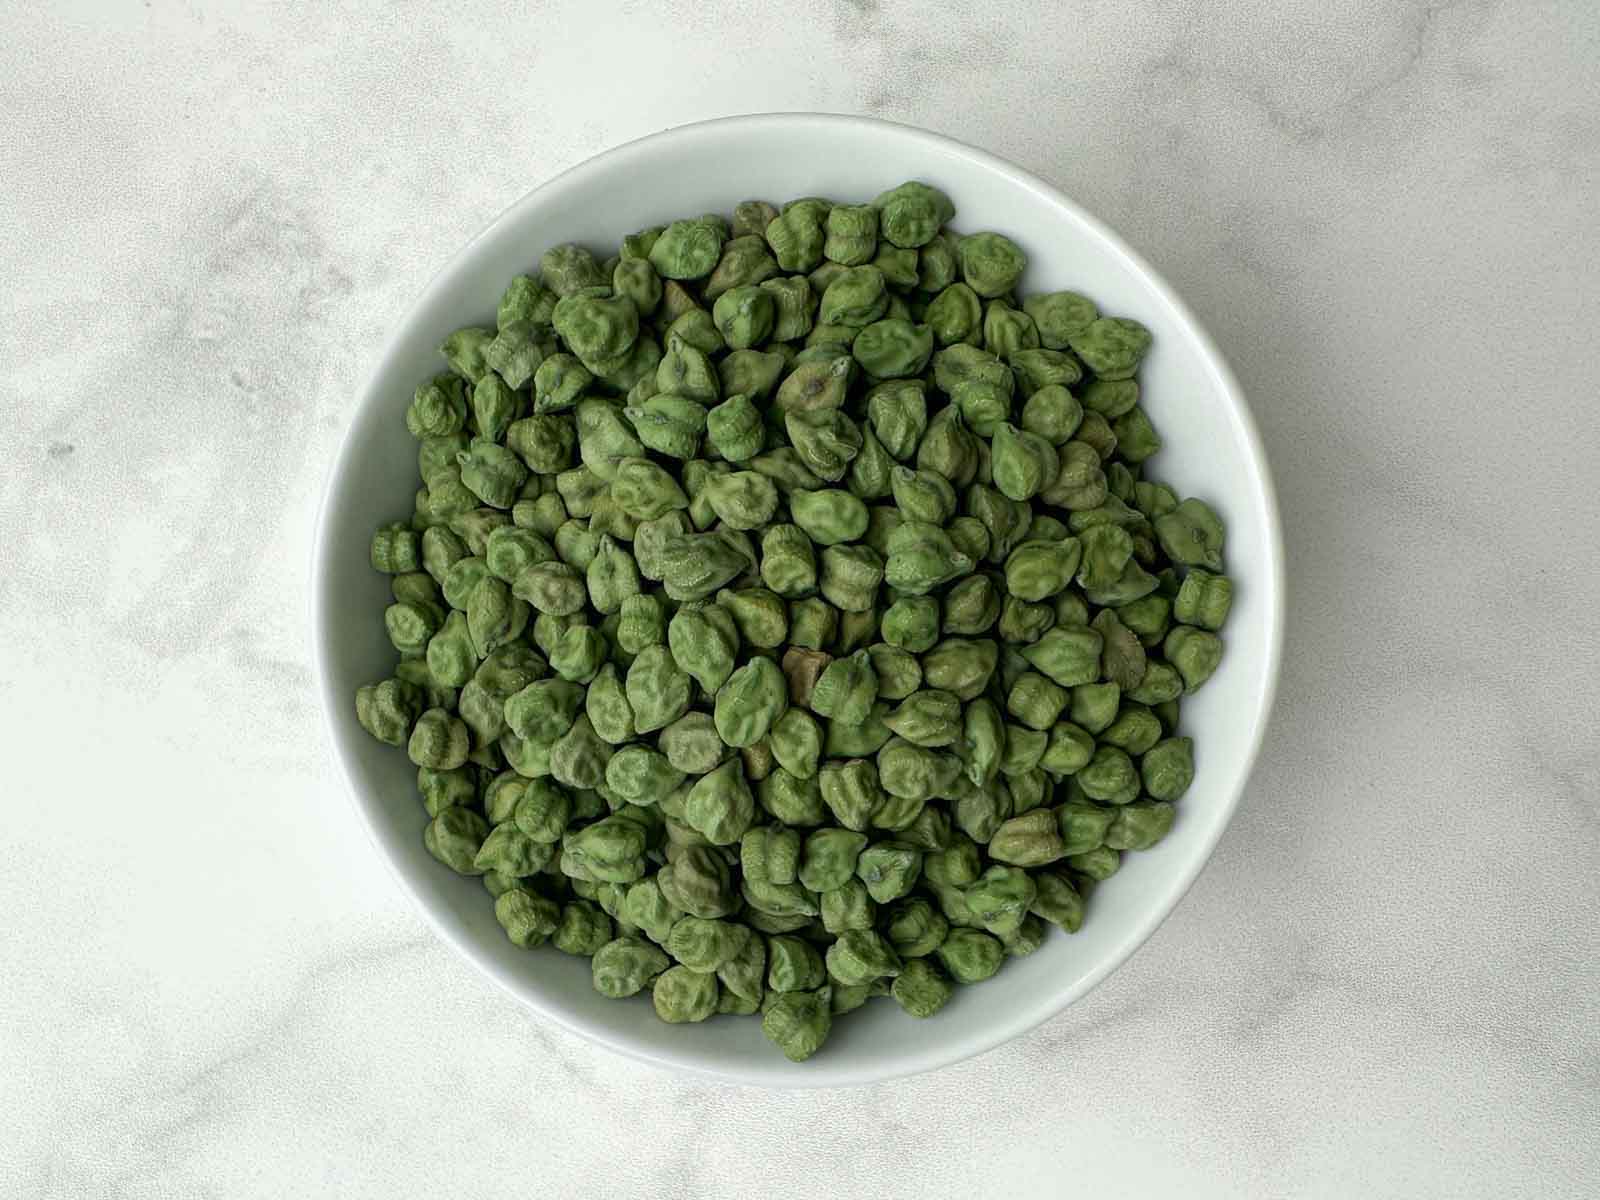 dried green chickpeas in a bowl